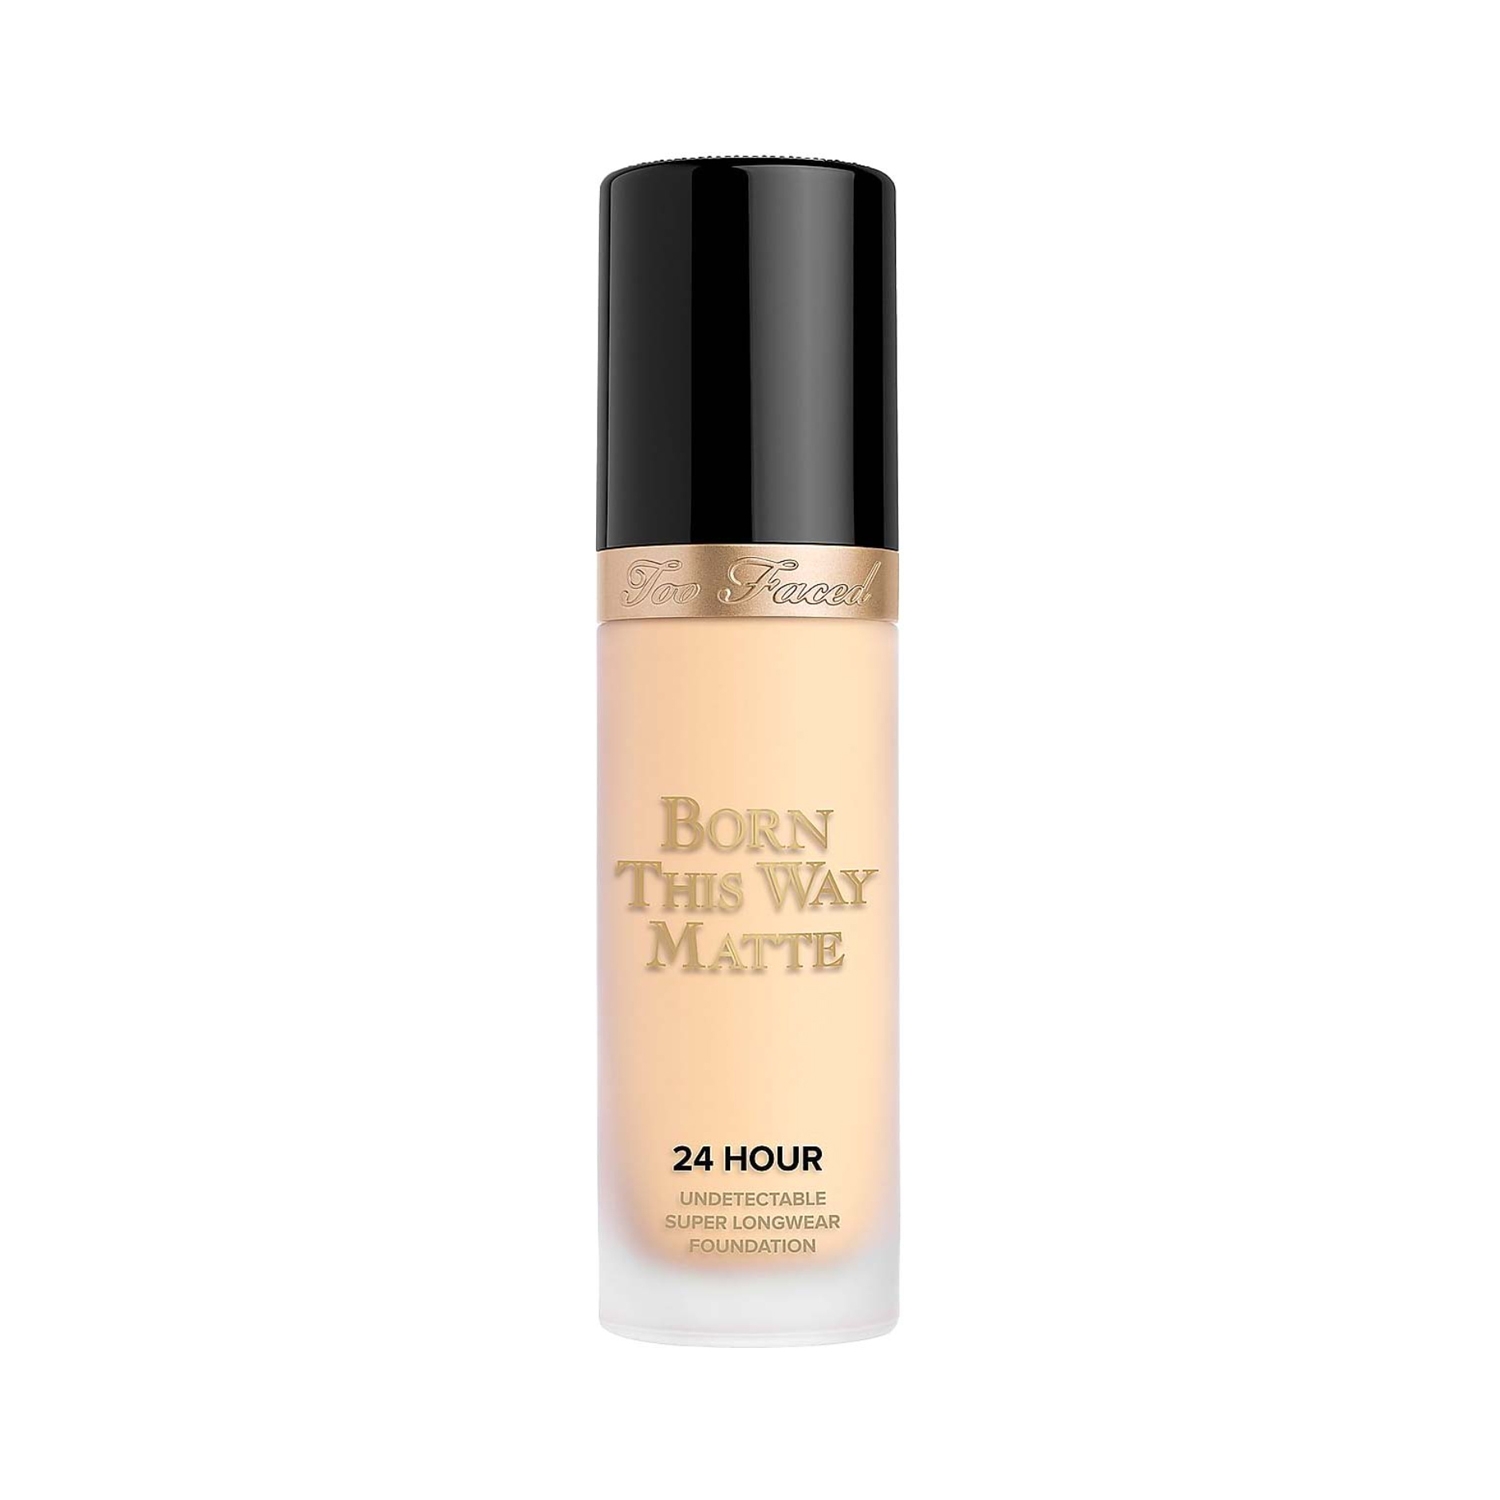 Too Faced | Too Faced Born This Way 24-Hour Longwear Matte Foundation - Light Beige (30ml)